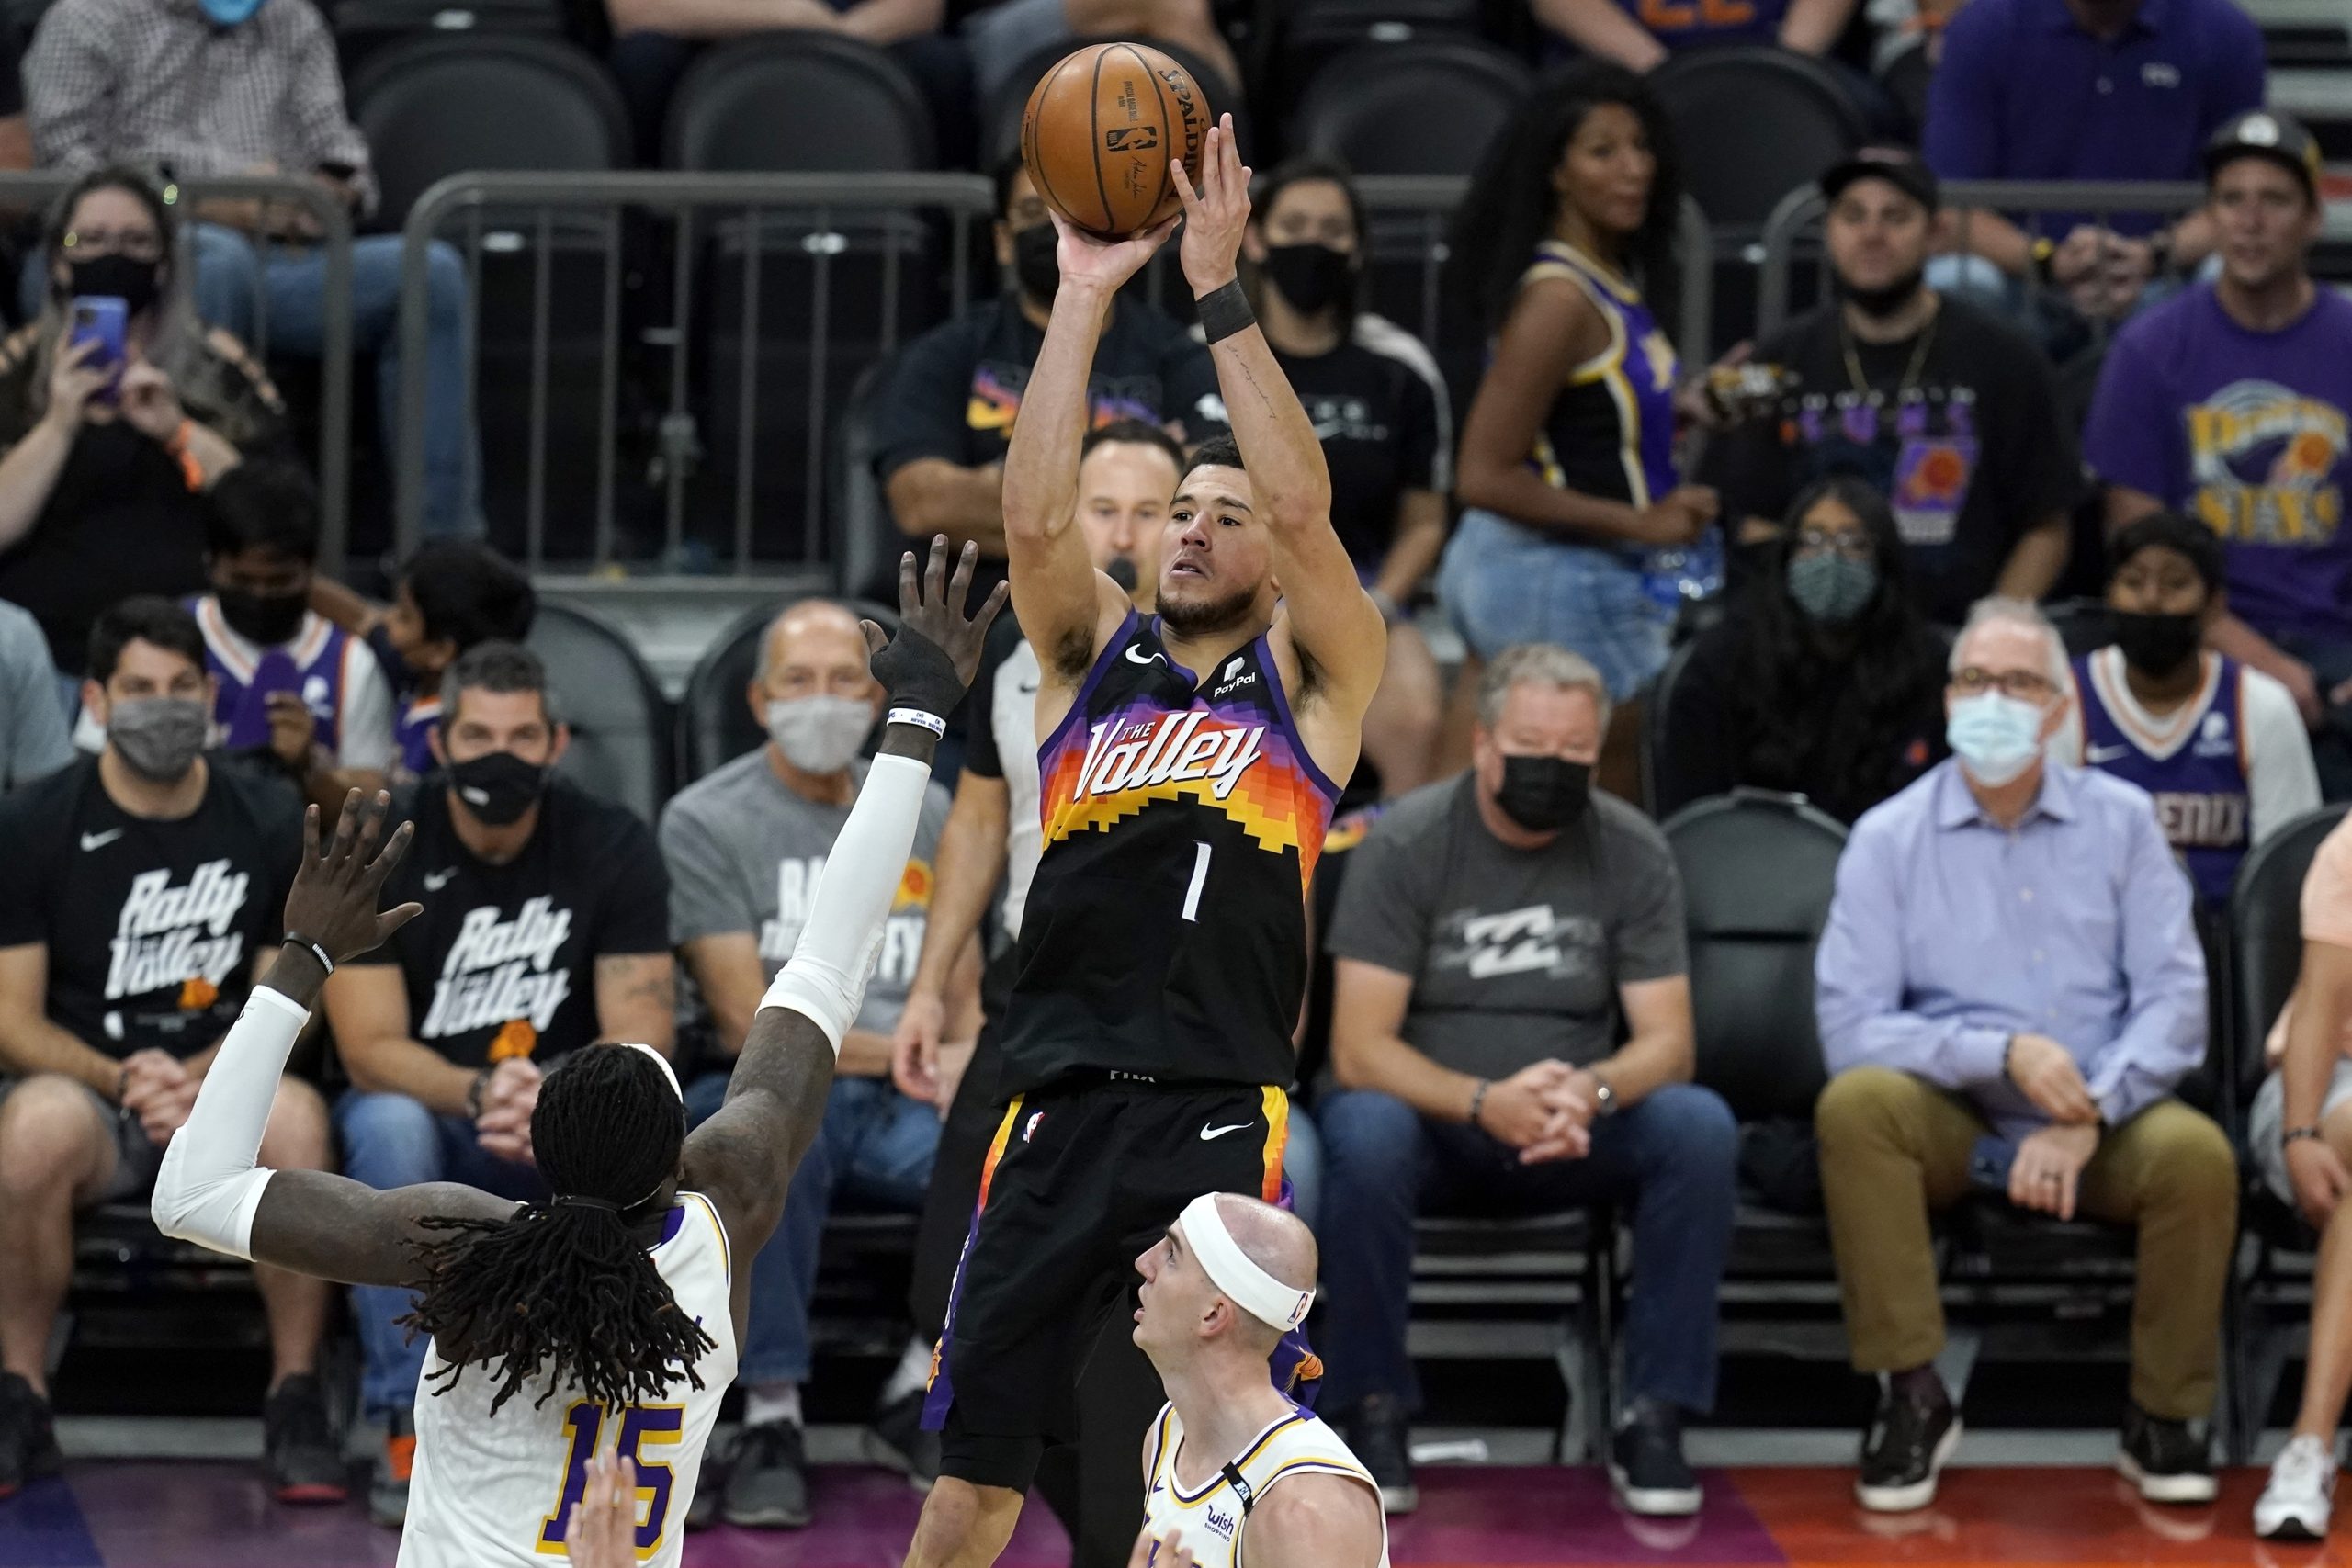 Devin Booker leads Phoenix Suns to victory over Los Angeles Lakers